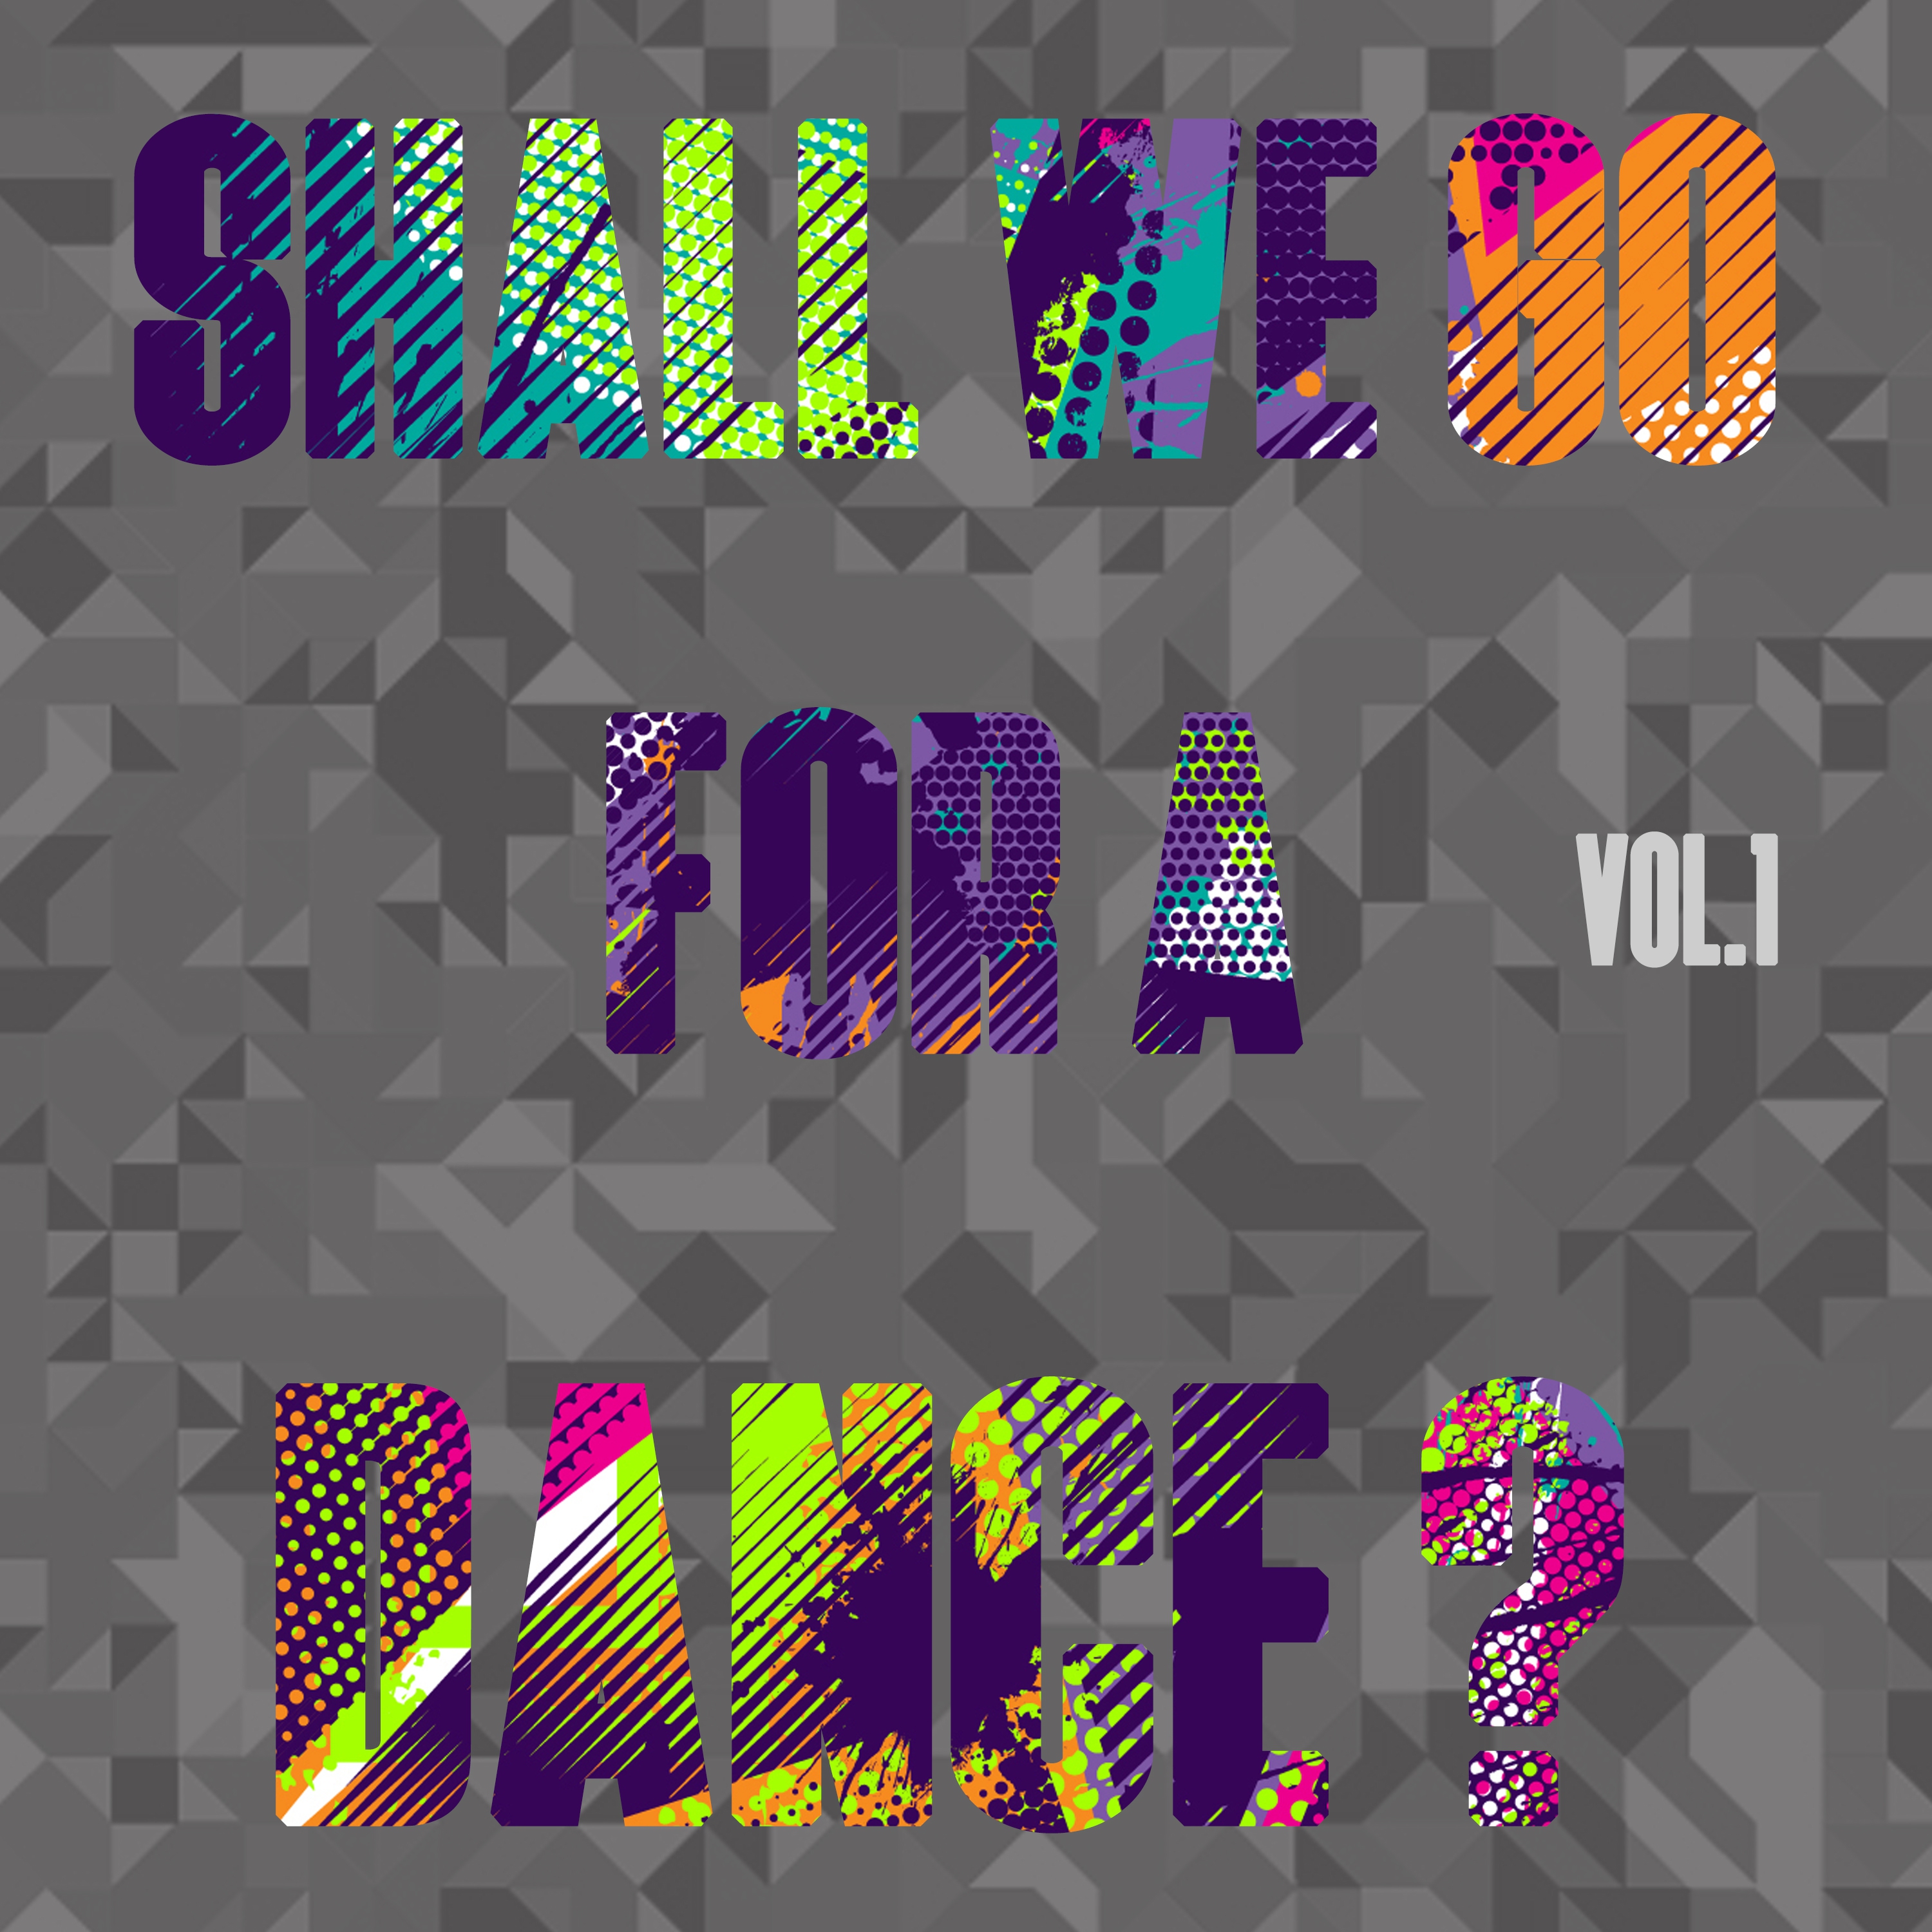 Shall We Go for a Dance?, Vol. 1